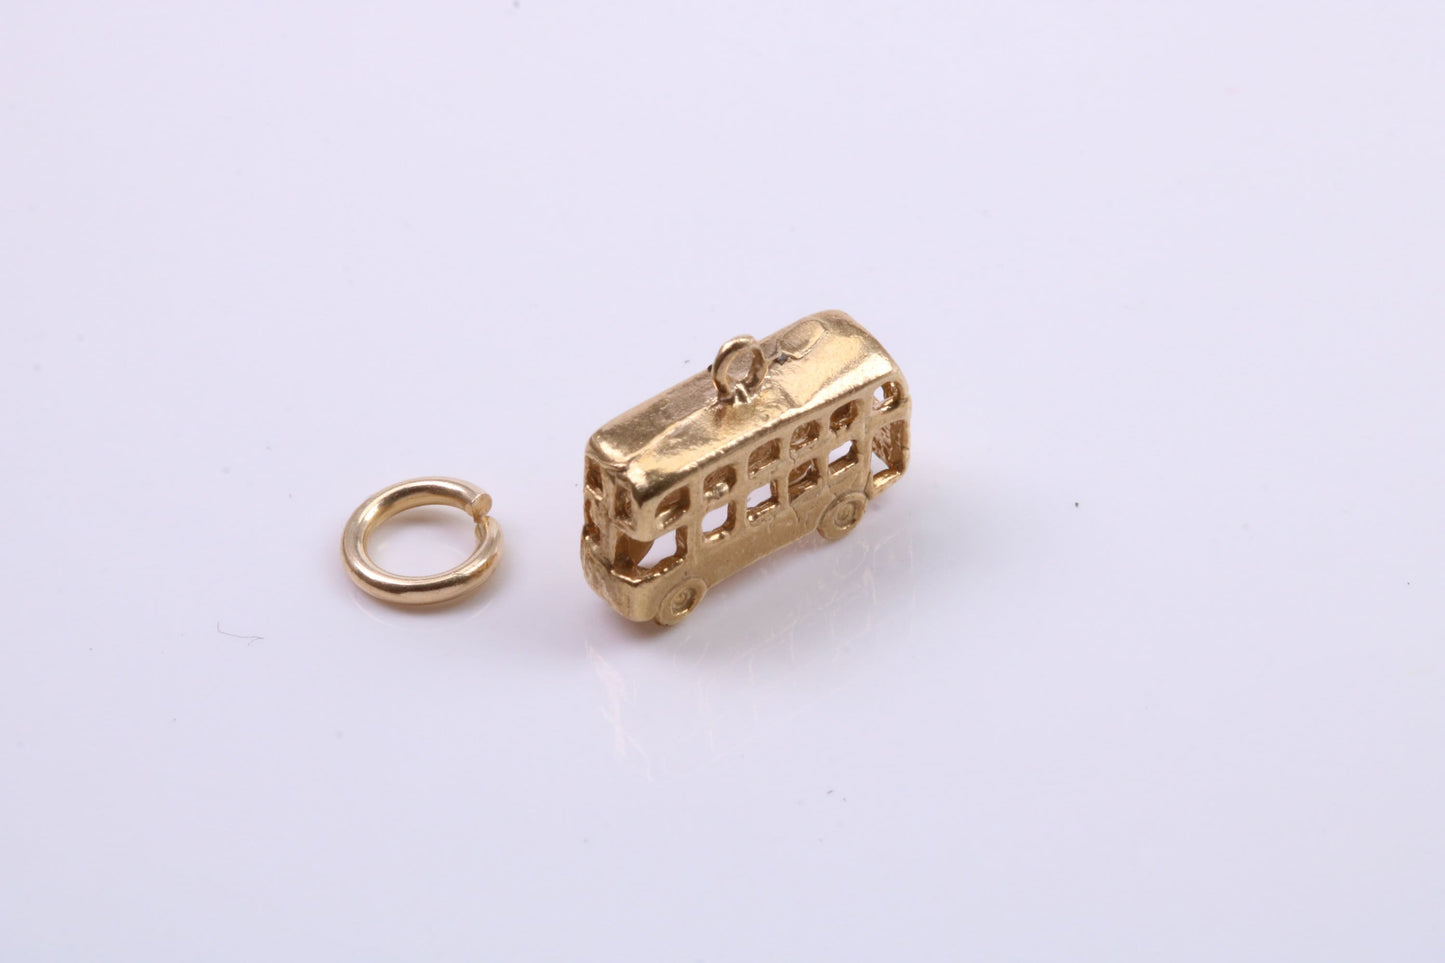 London Bus Charm, Traditional Charm, Made from Solid Yellow Gold, British Hallmarked, Complete with Attachment Link